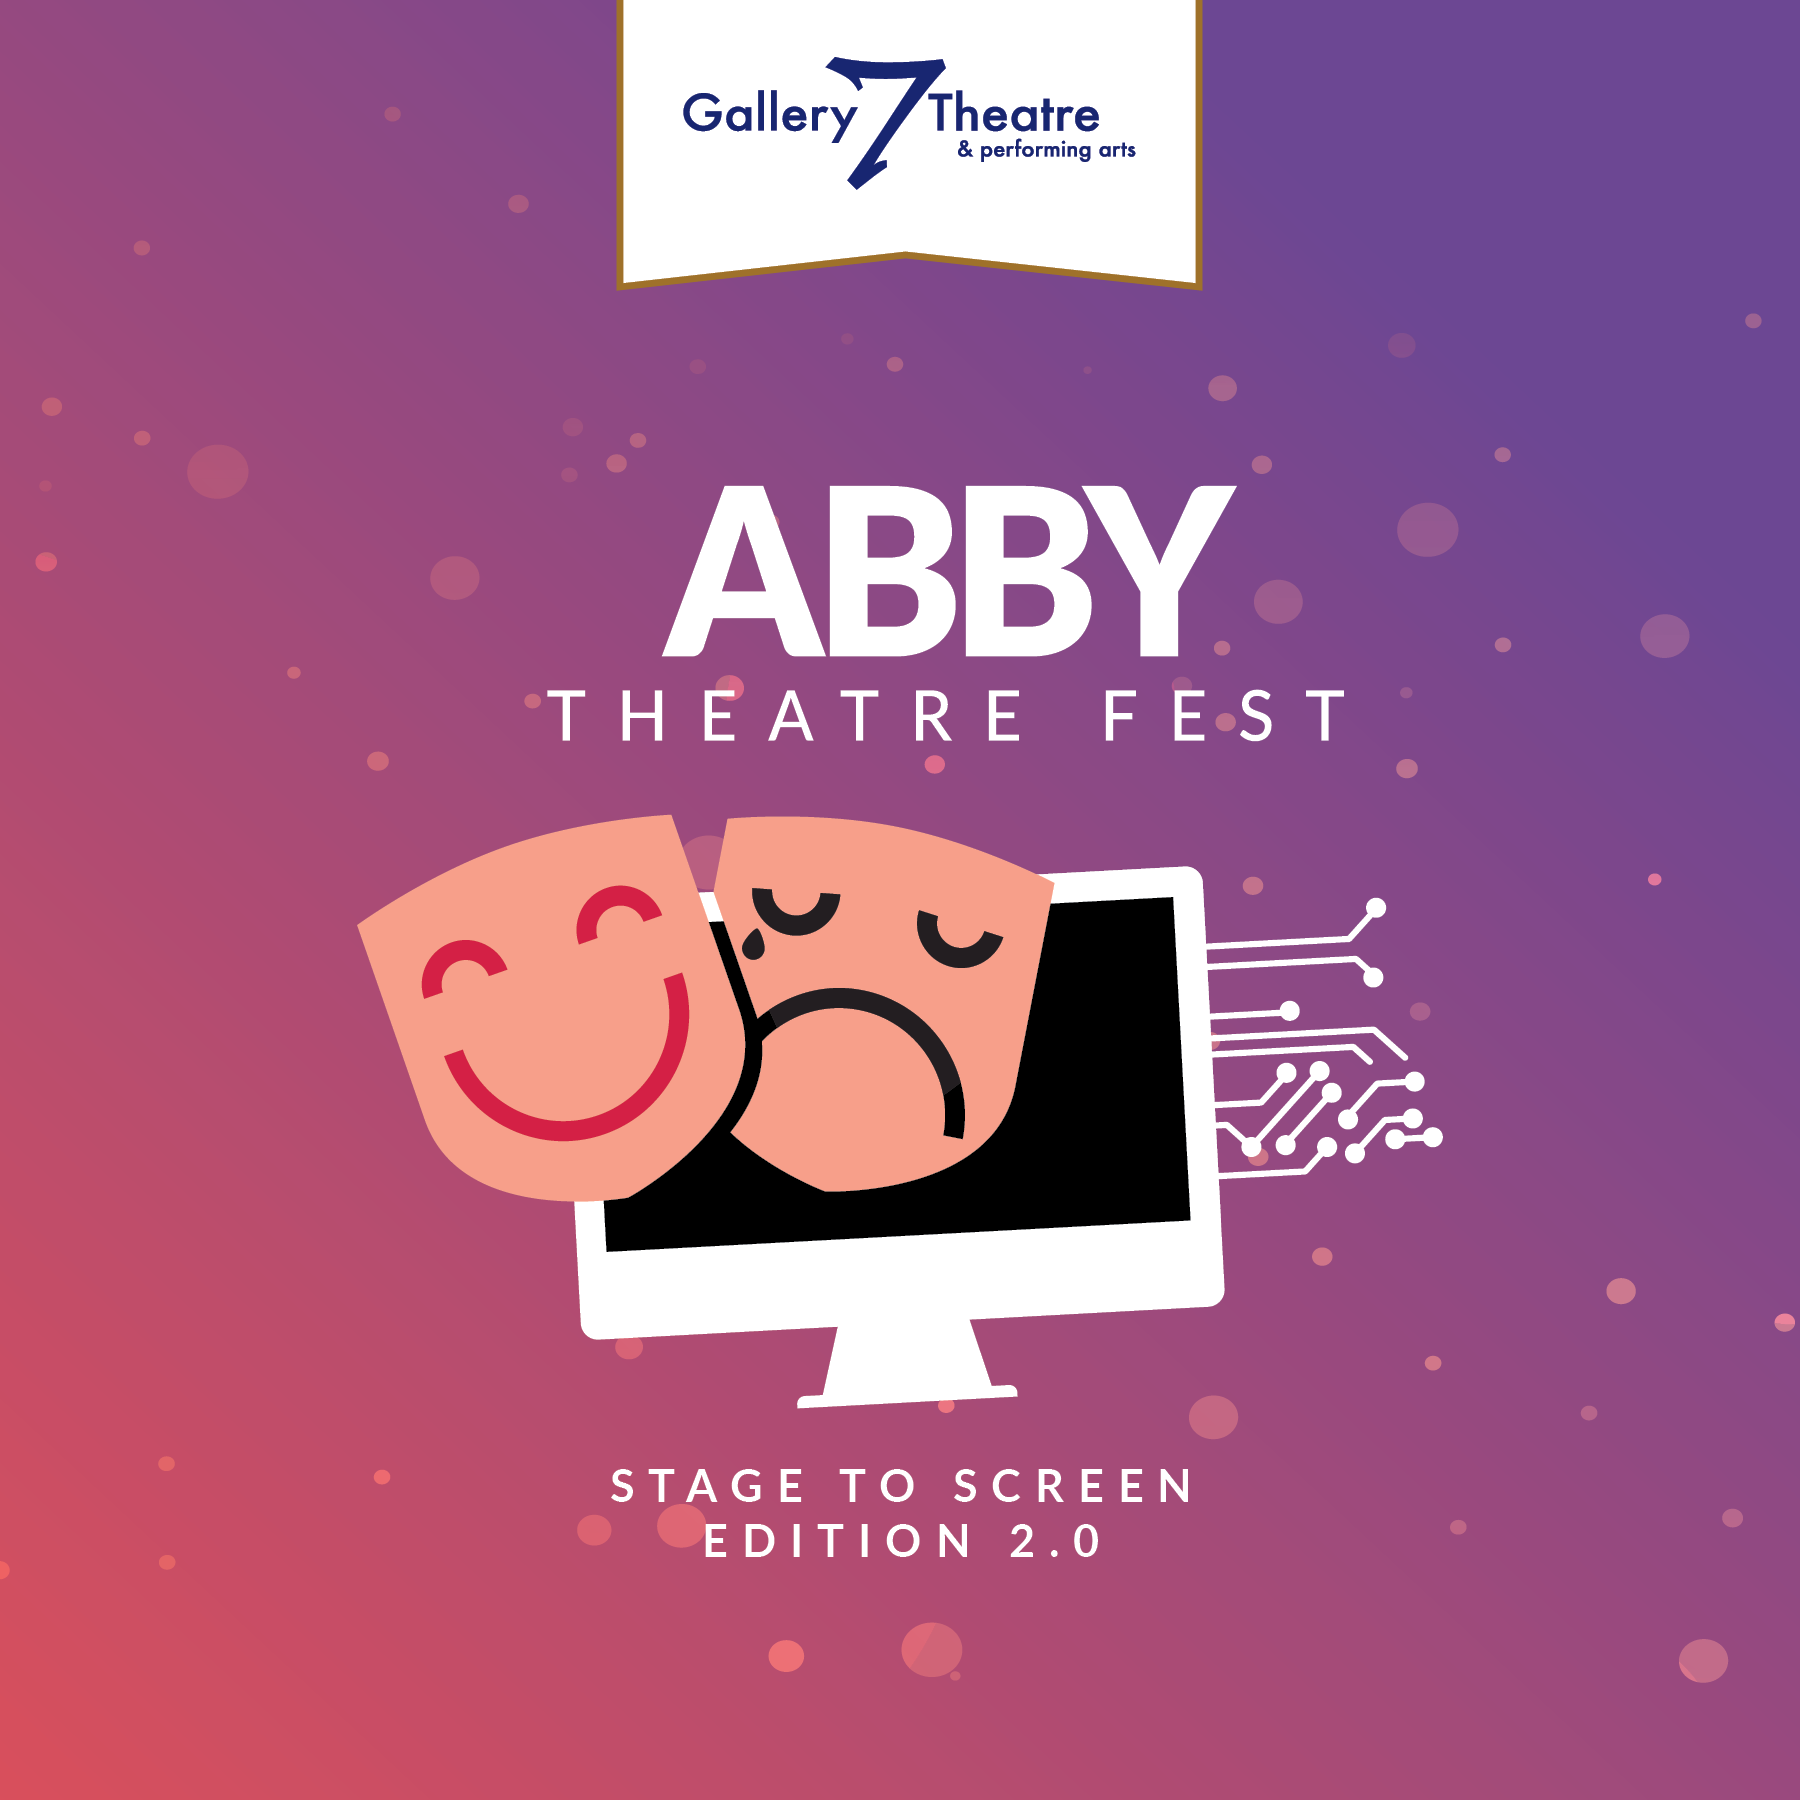 Abby Theatre Fest Stage to Screen Edition 2.0